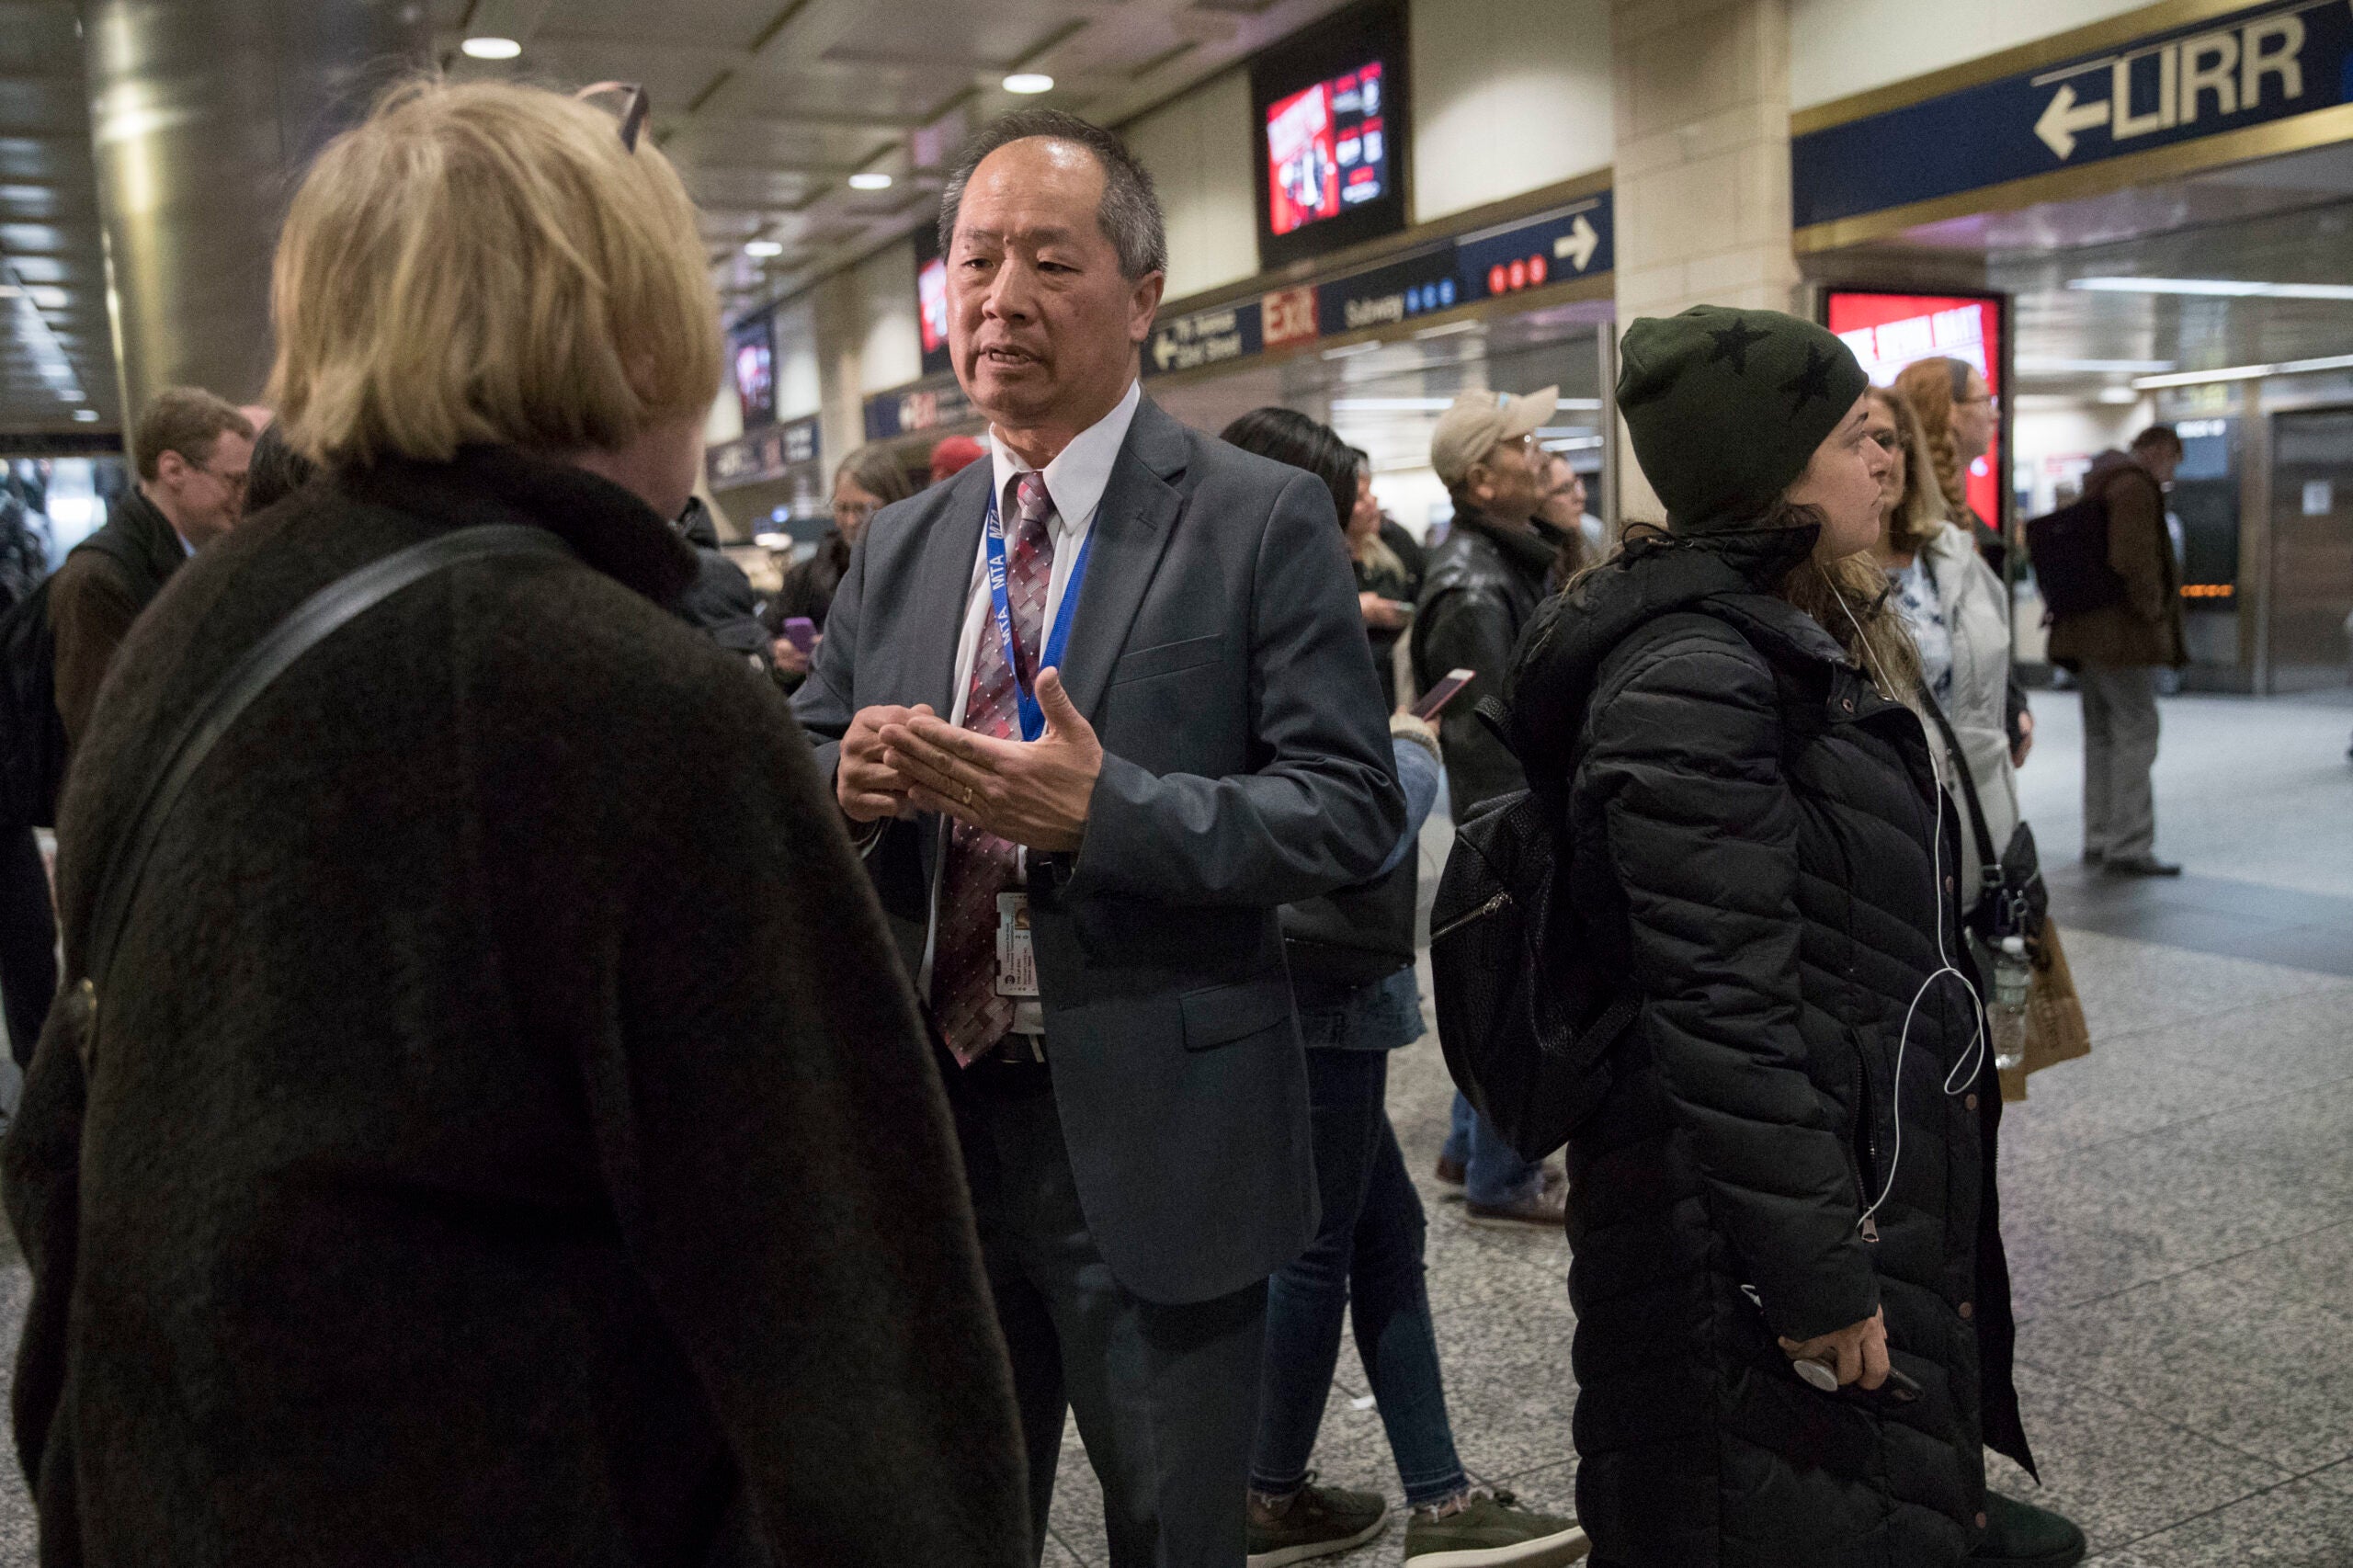 Then-Long Island Rail Road President Phillip Eng, center, talks to evening rush hour commuters at Penn Station in New York, April 17, 2018.